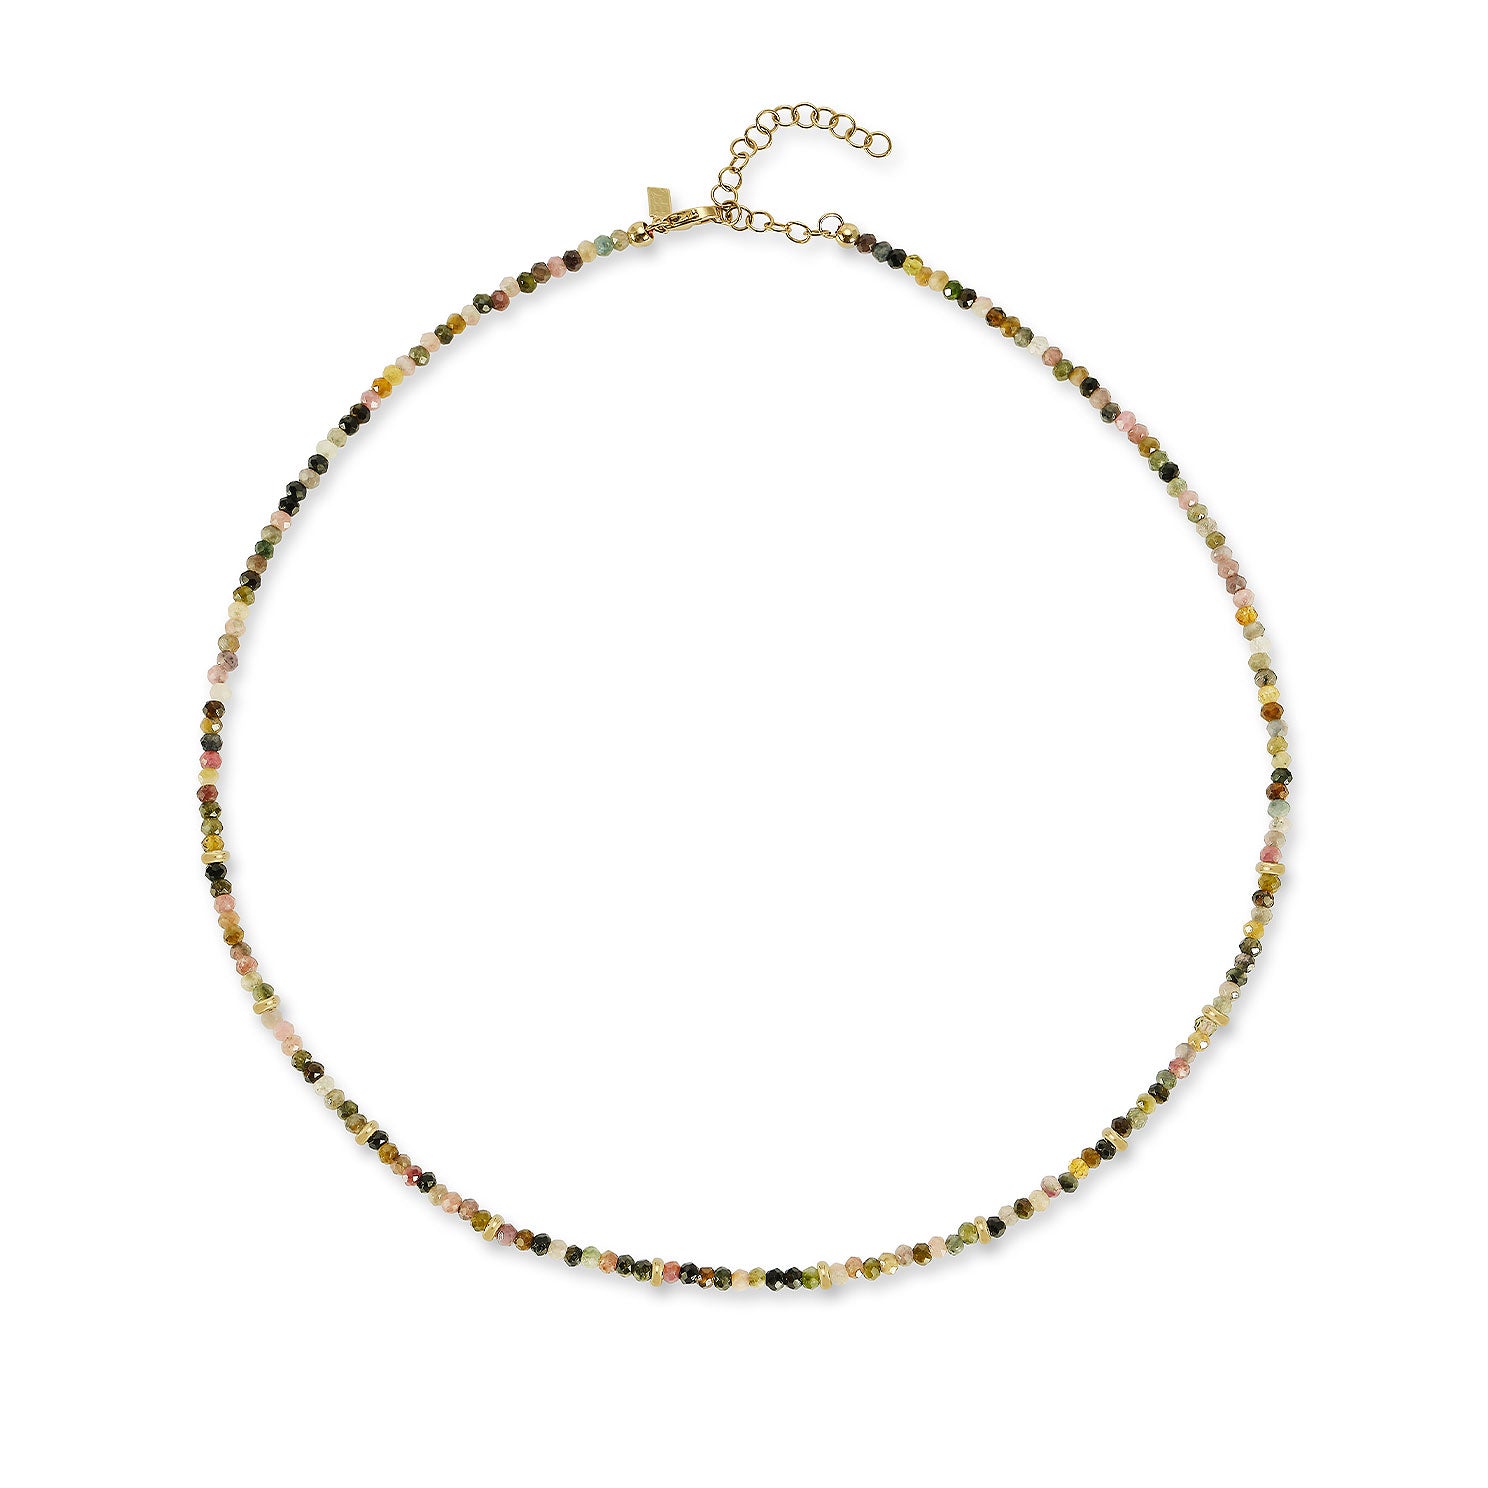 Birthstone Bead Necklace In Tourmaline with 14k yellow gold chain